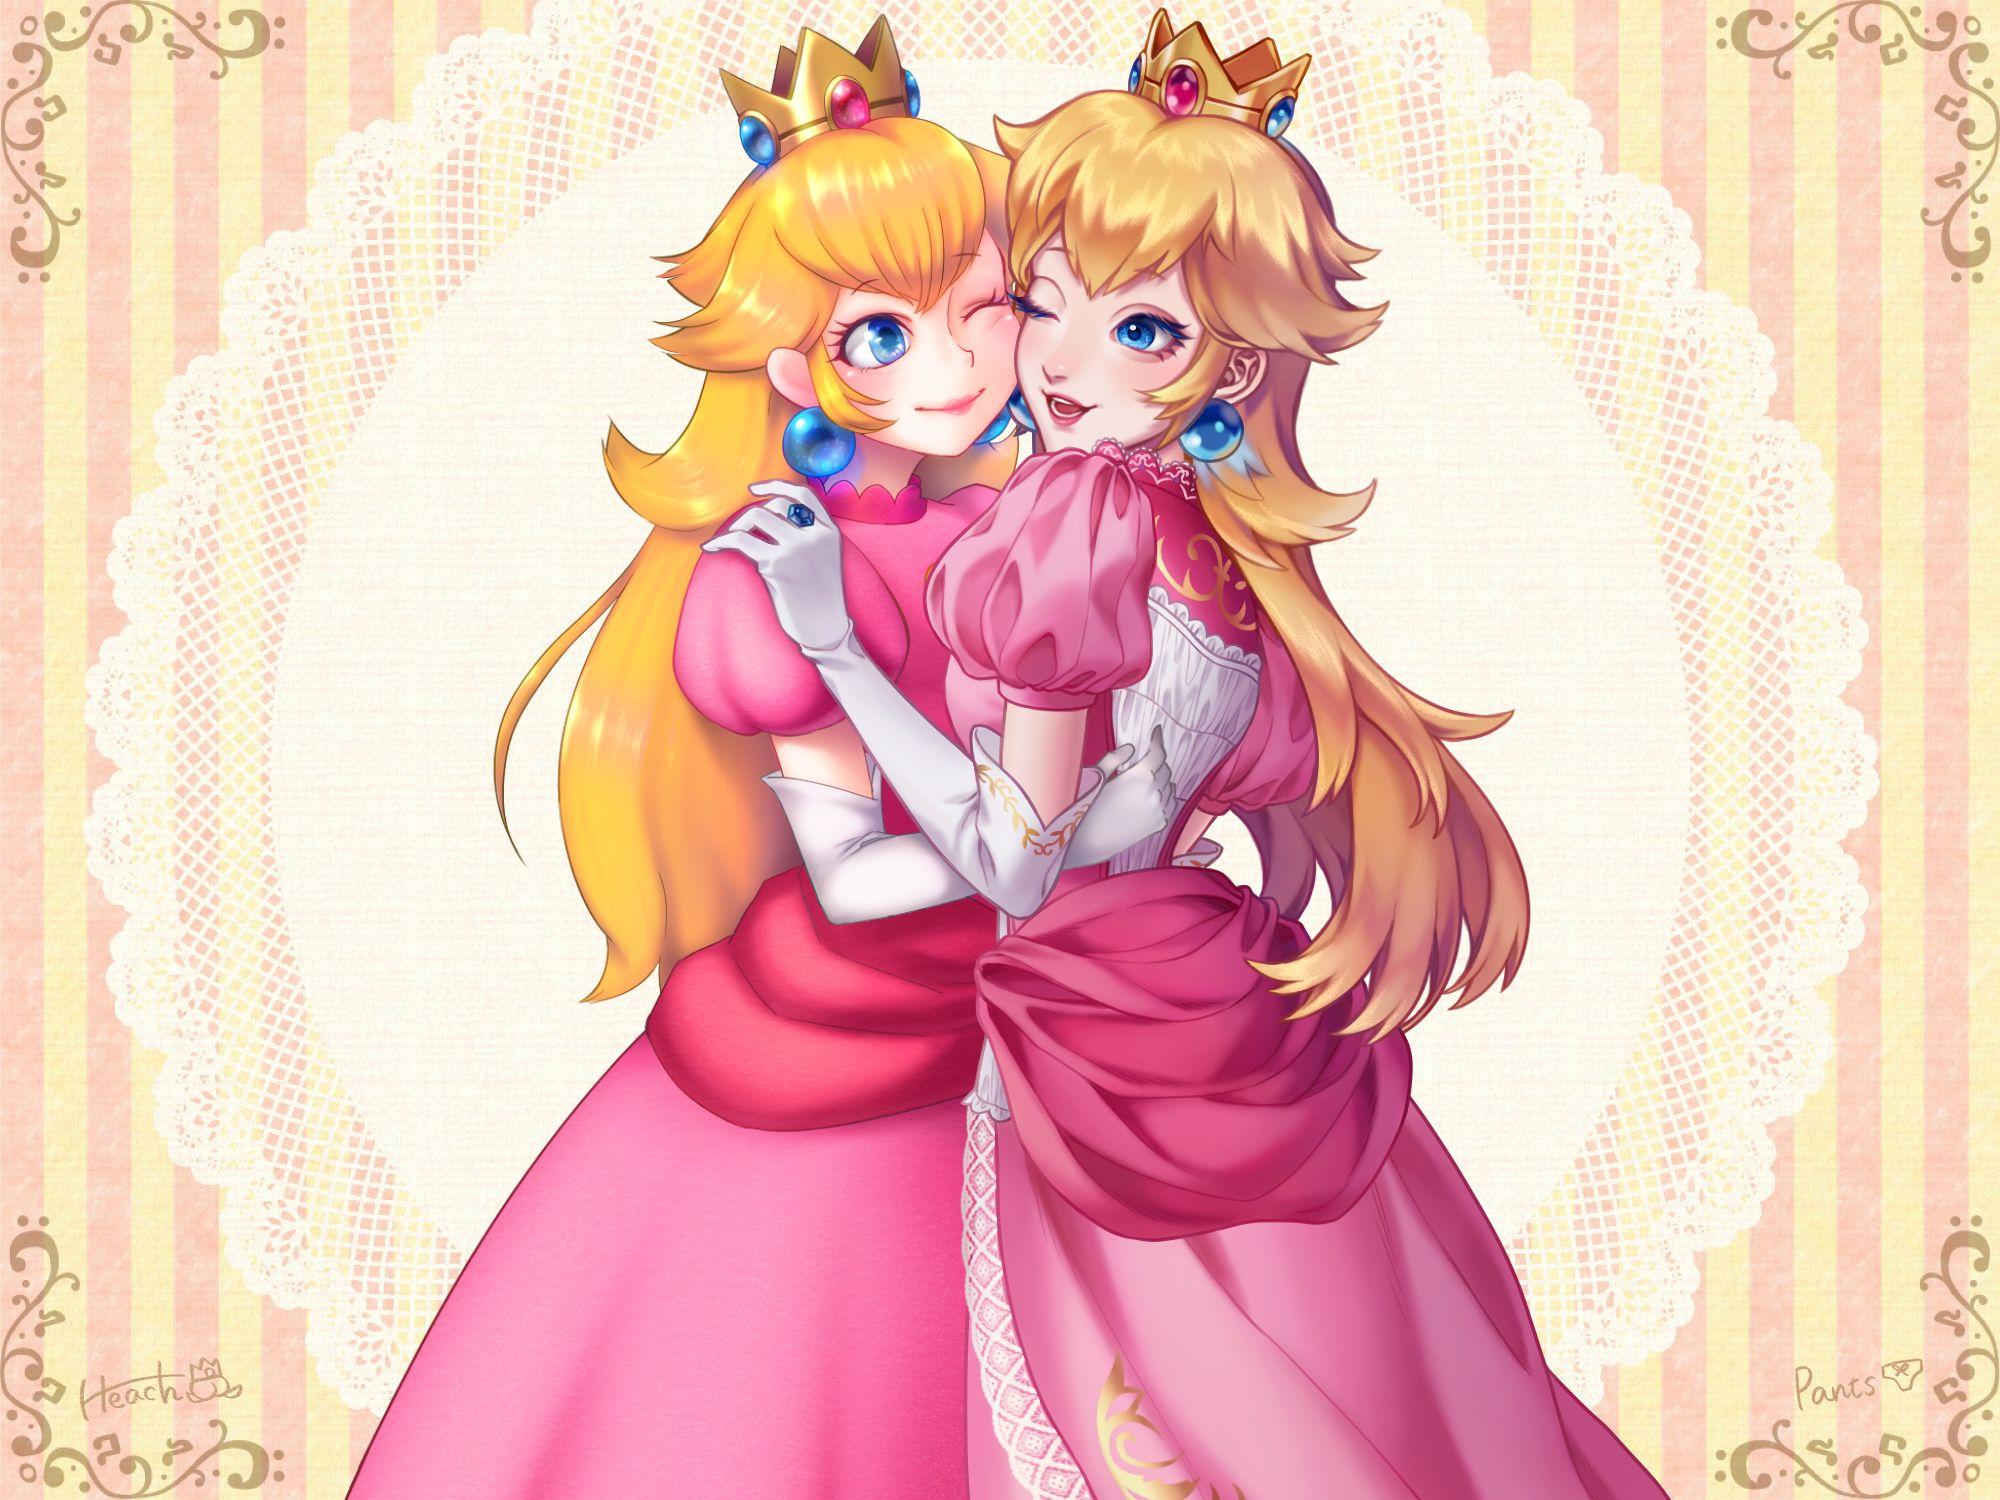 Details 84+ anime peach aesthetic latest - in.cdgdbentre